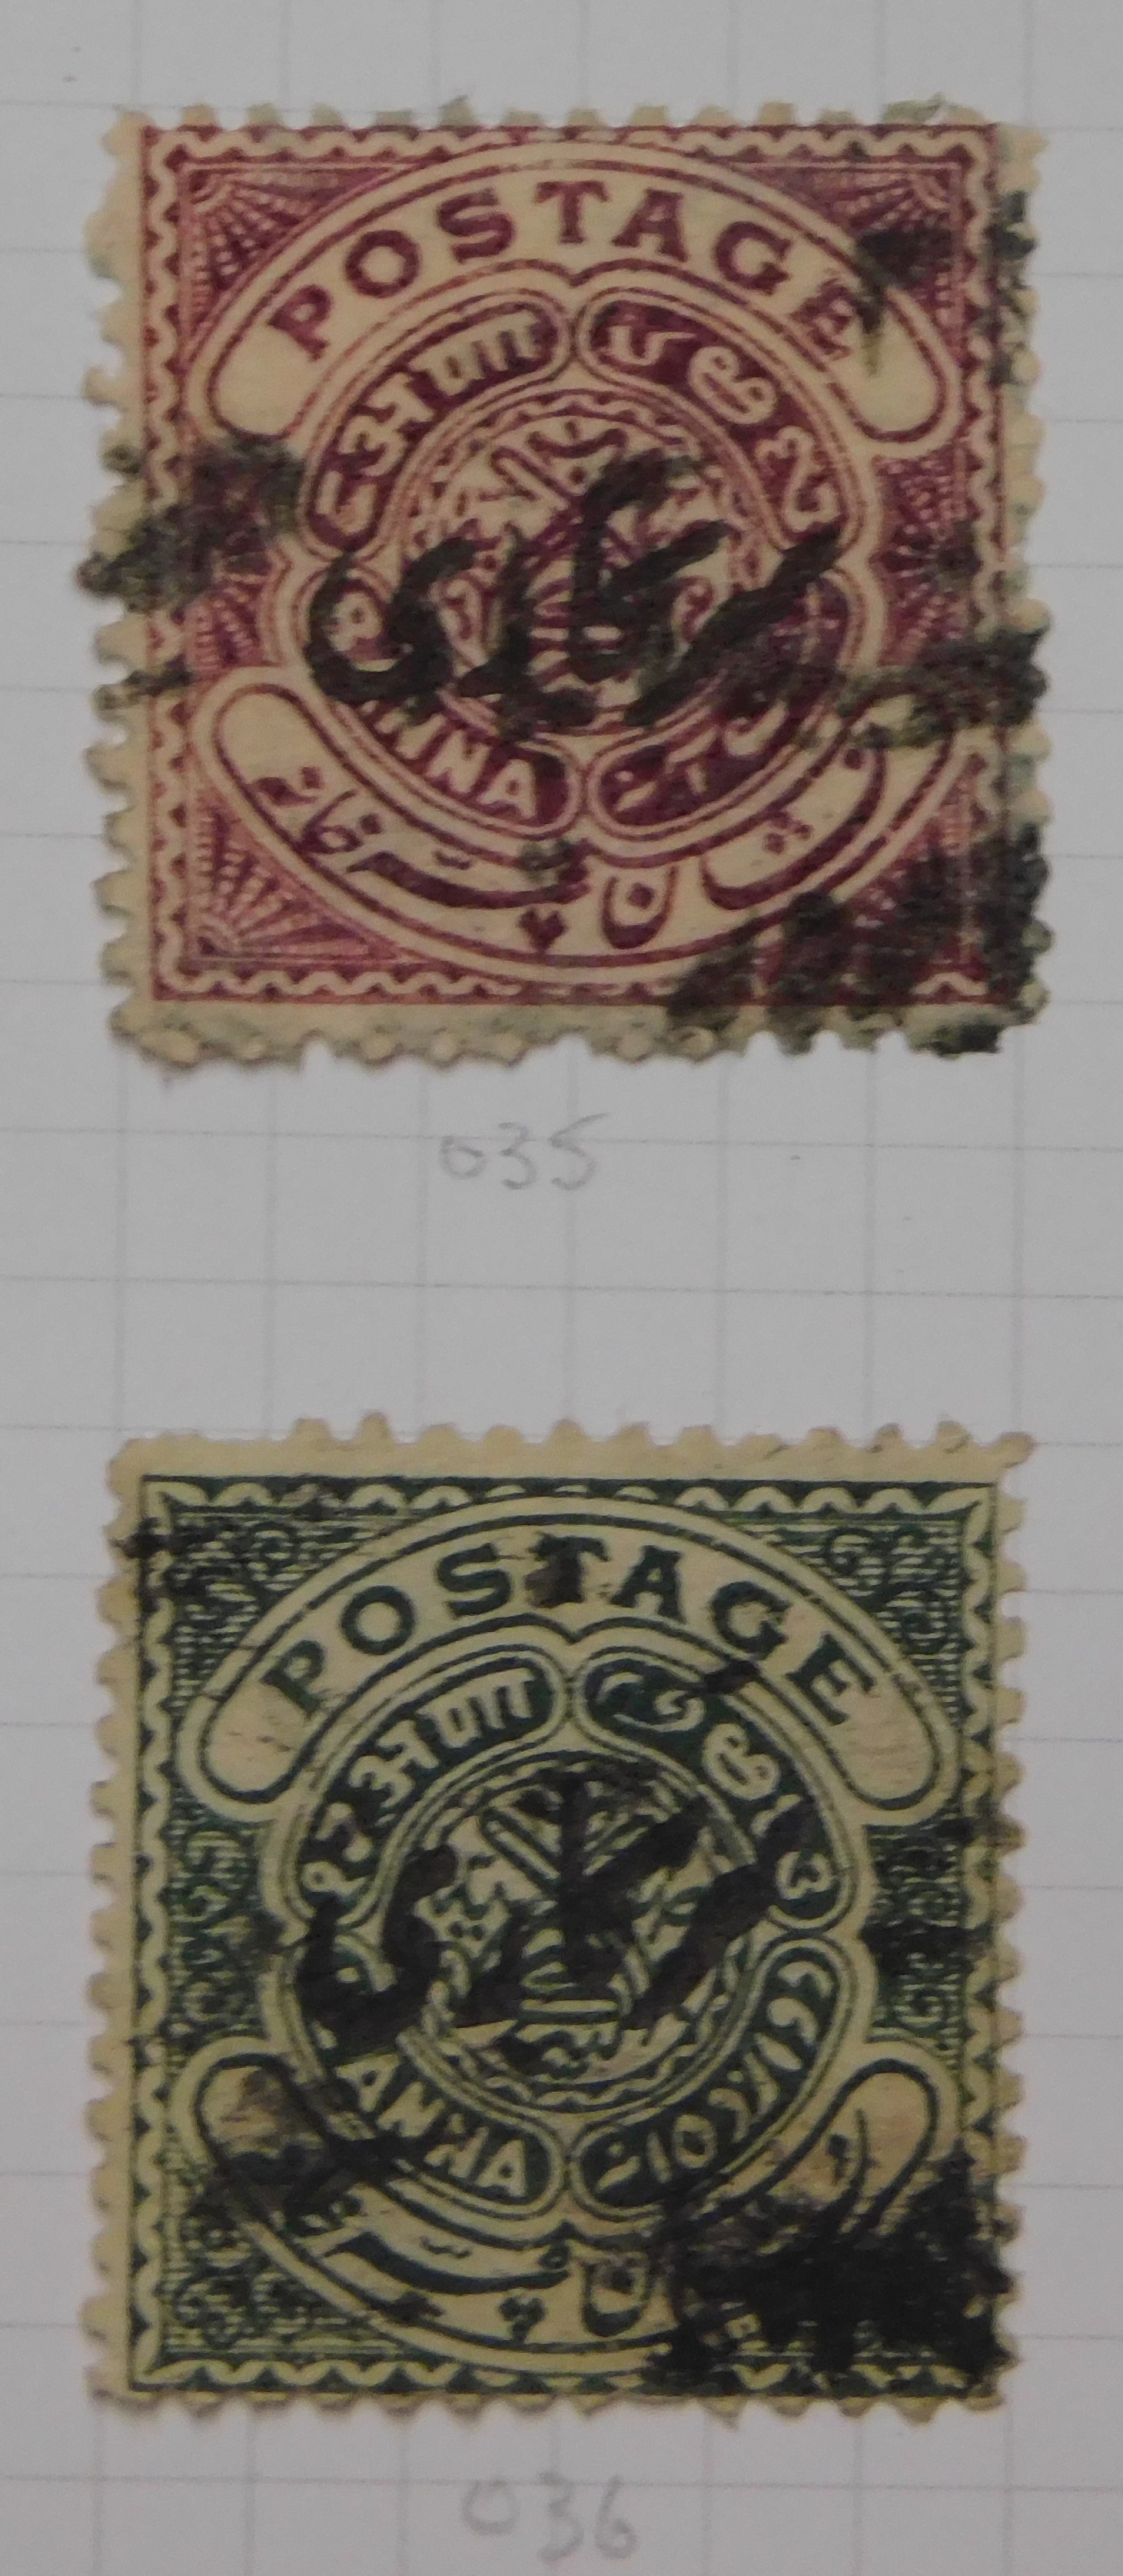 India (Hyderabad) Officials very fine used 1911-1912 035 to 039c, 038 P12.1/2 (Not catalogues) al 20 - Image 2 of 7